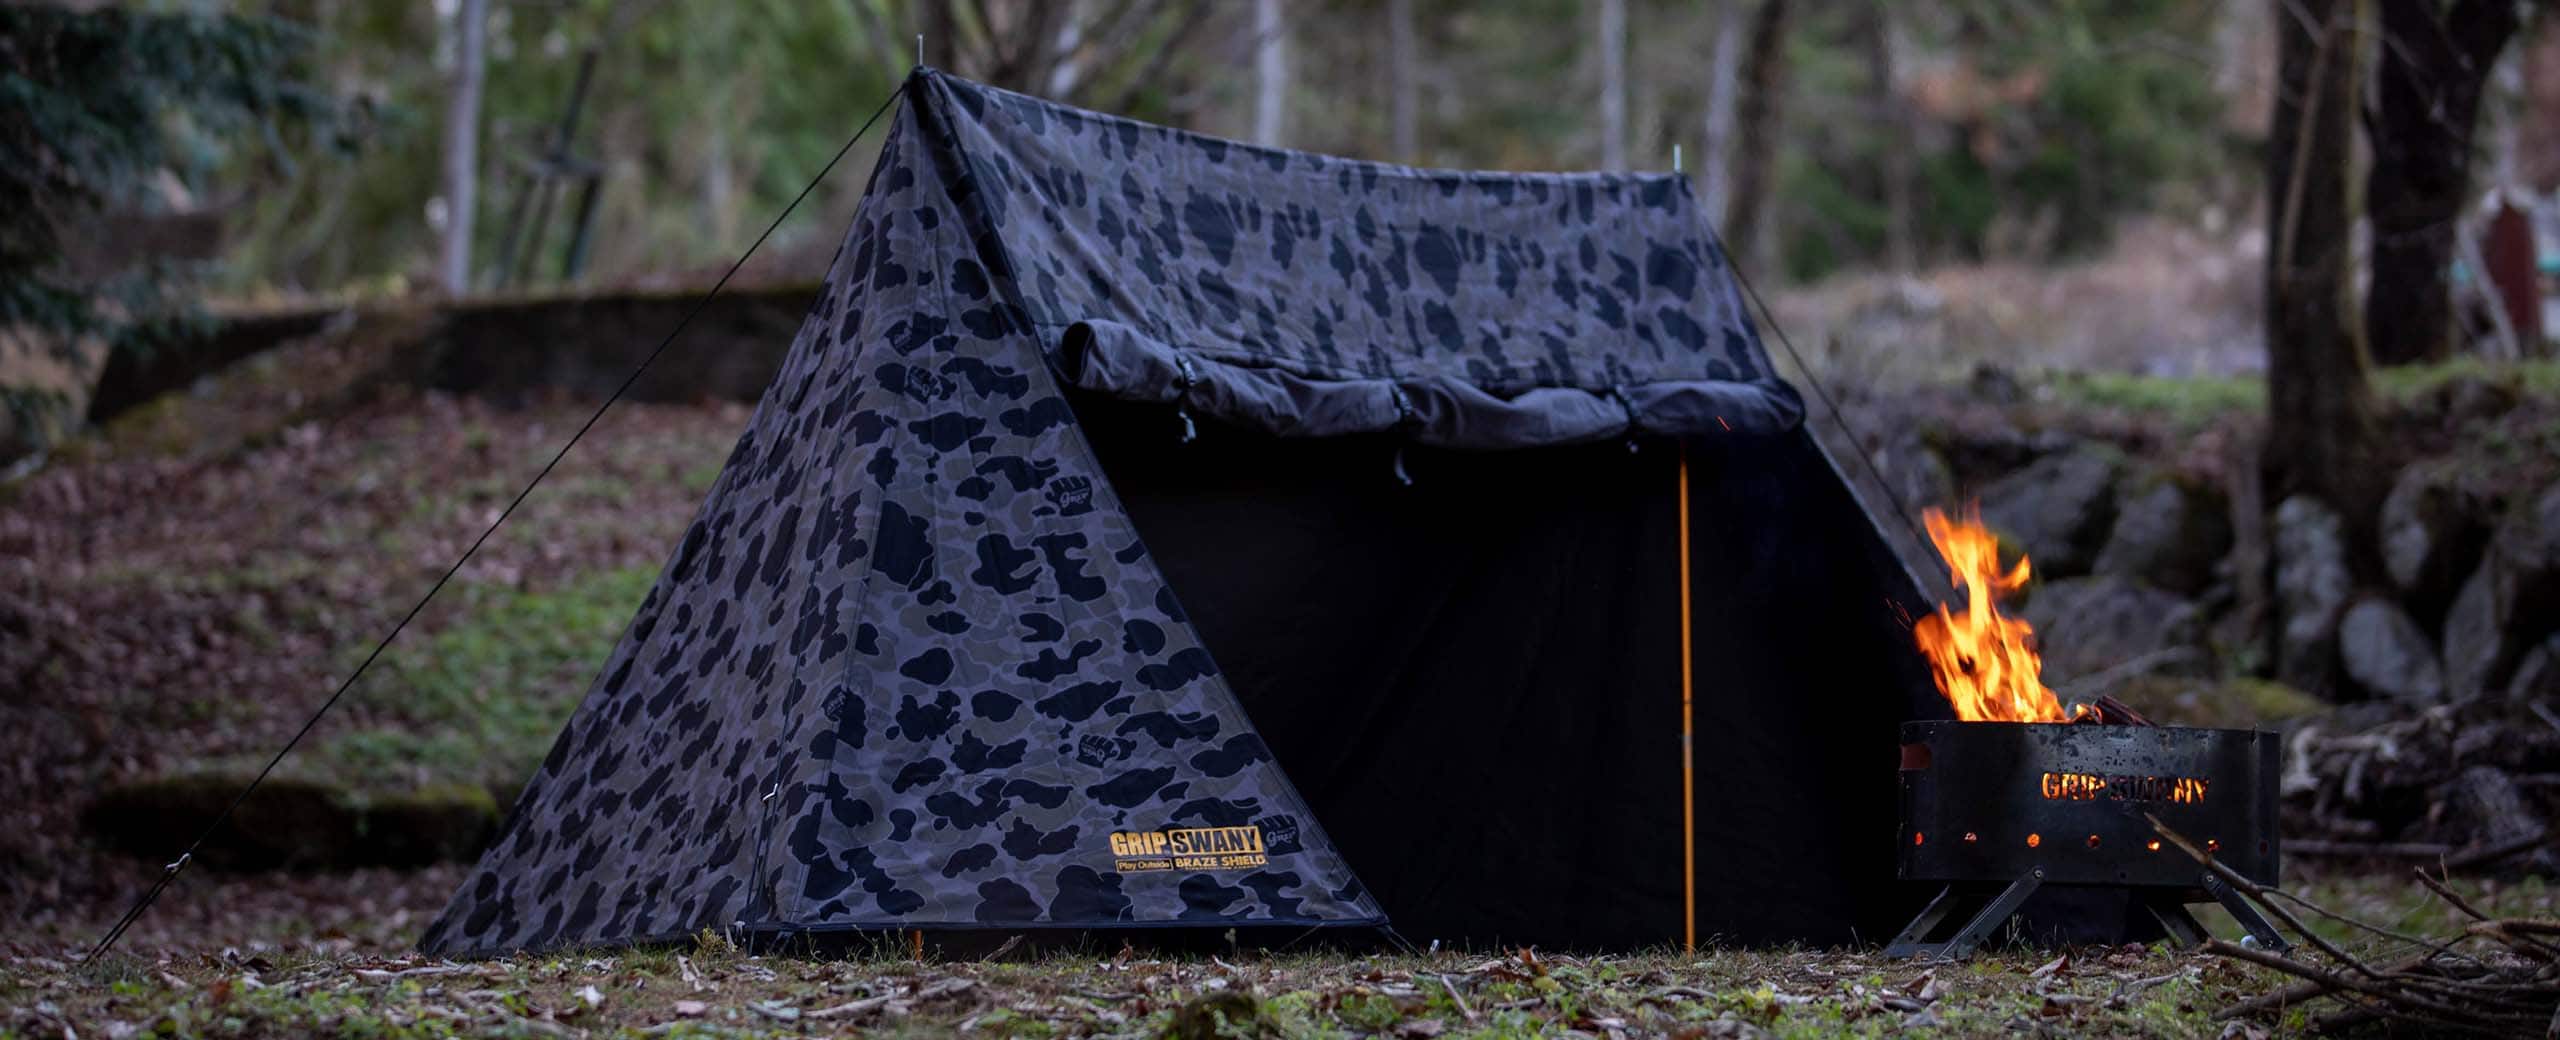 GRIP SWANY×atmos FIREPROOF GS TENT-